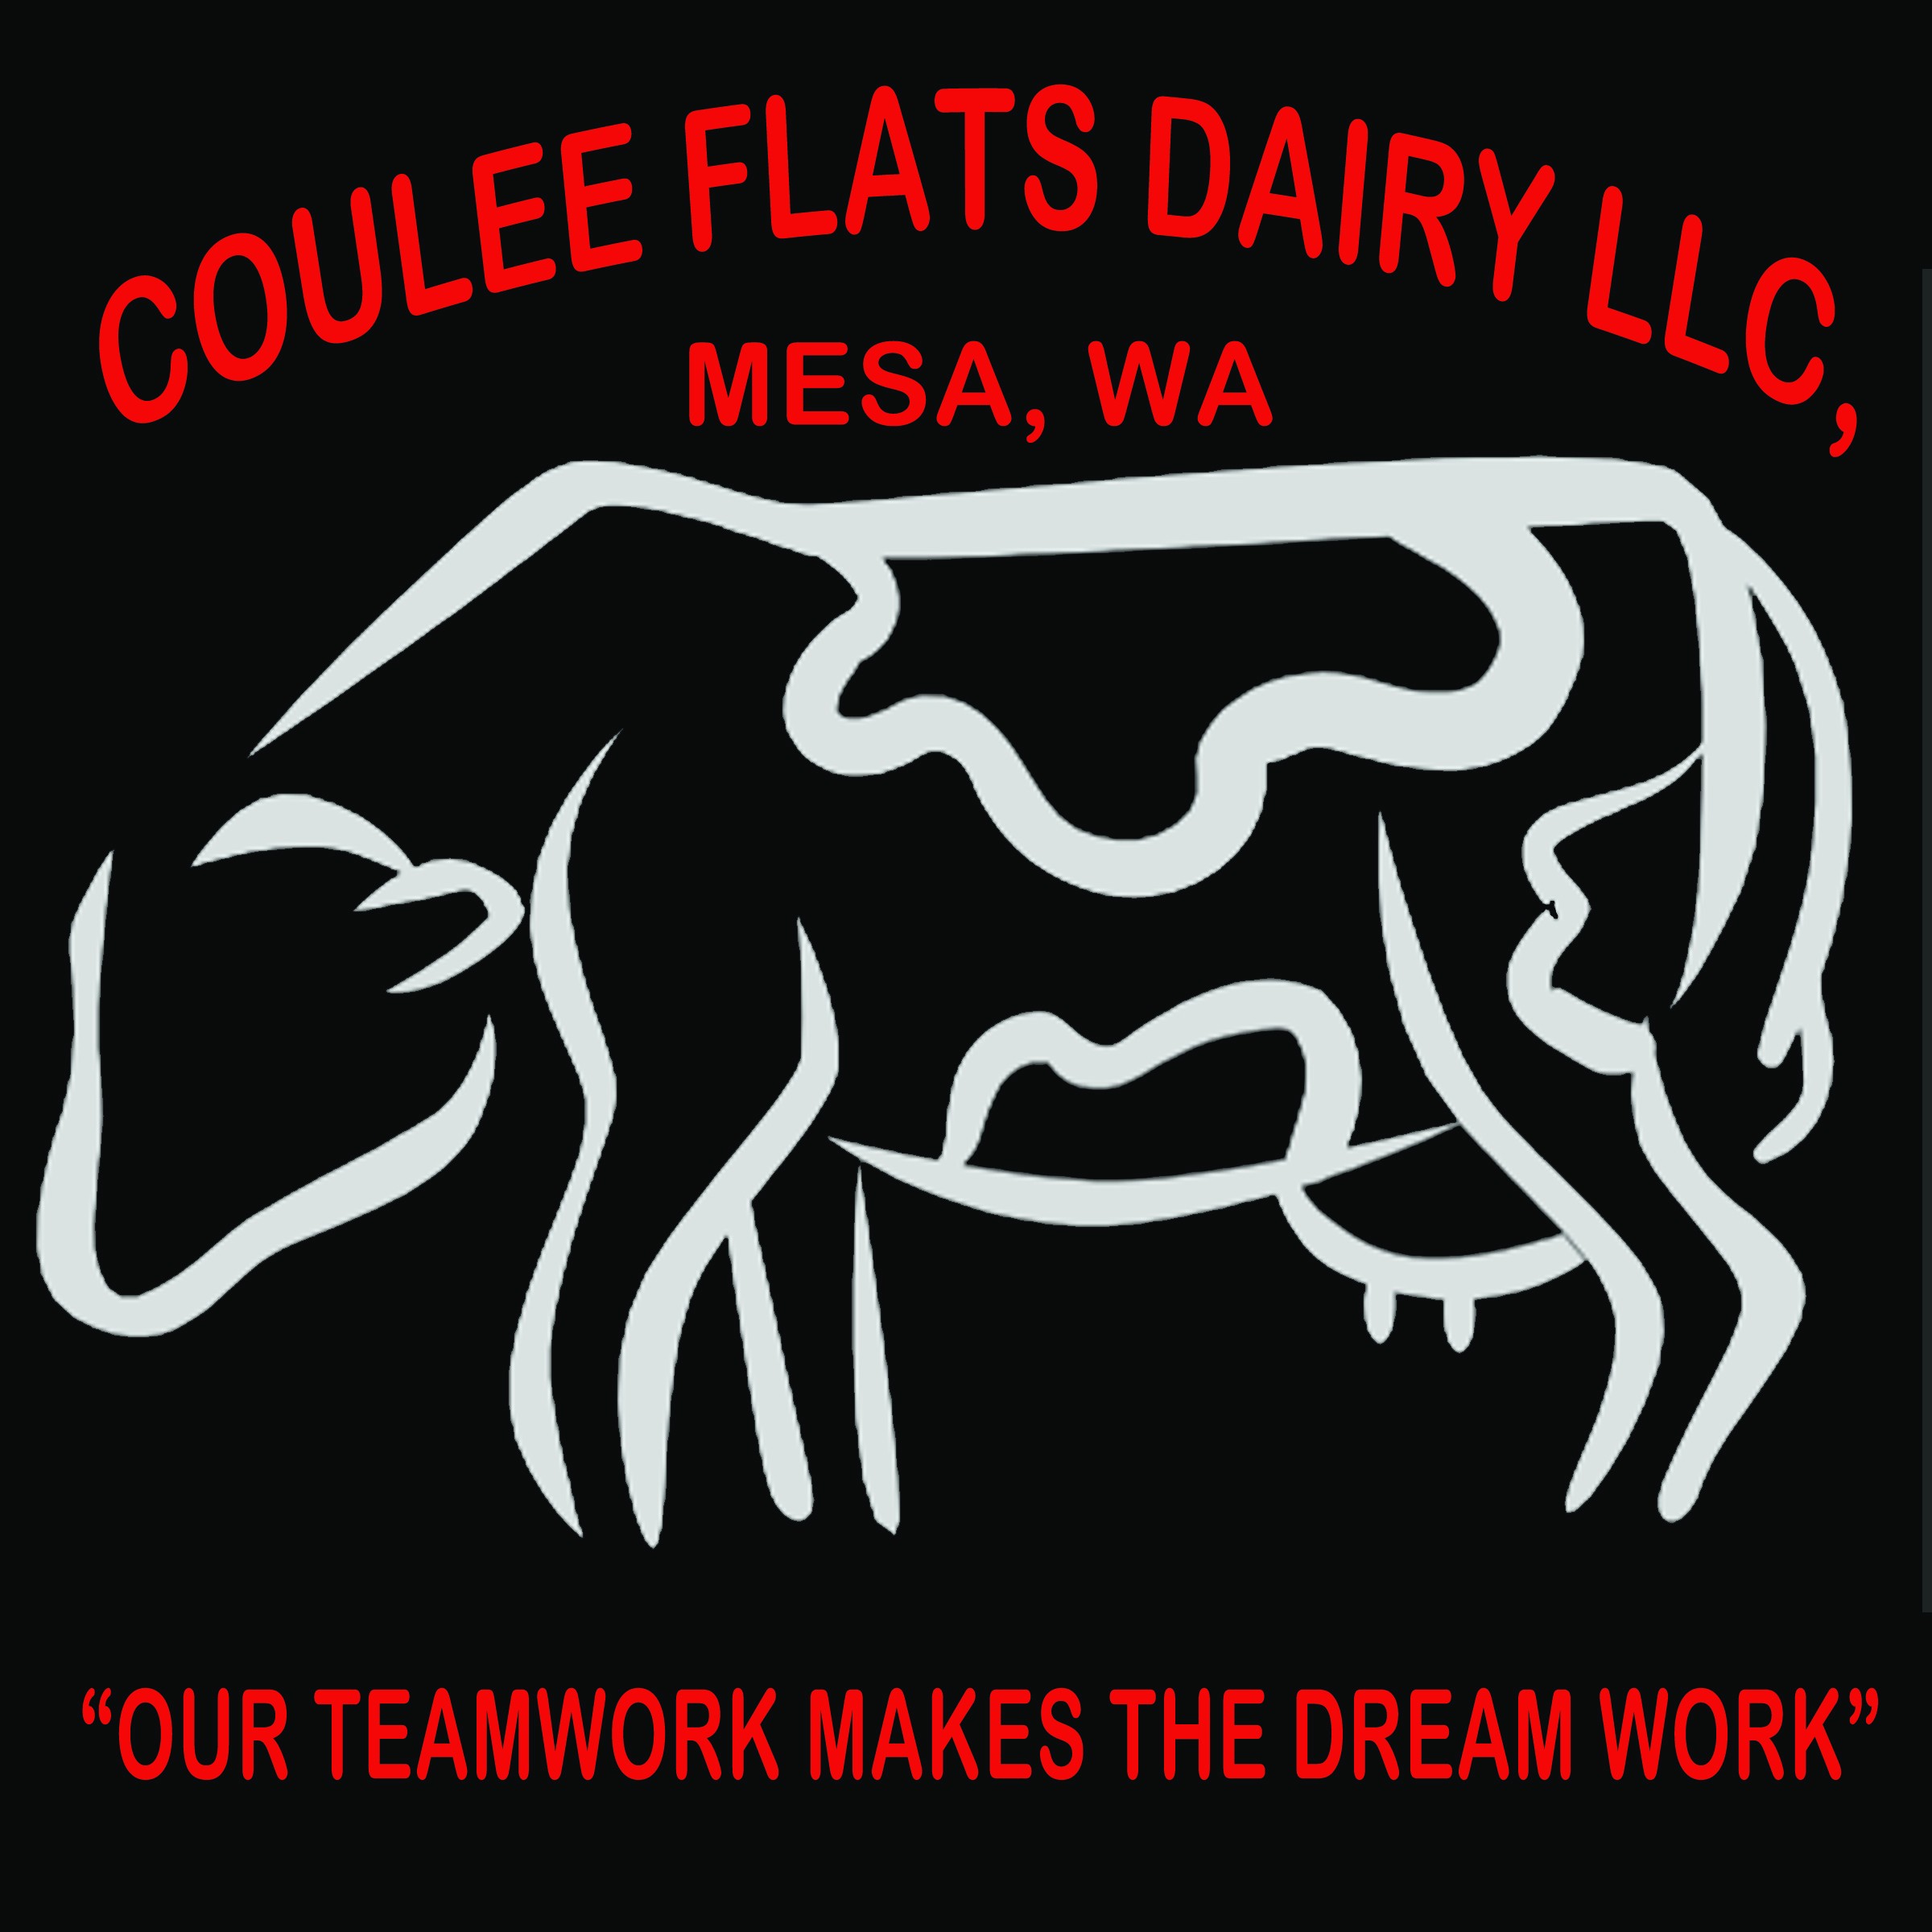 Coulee Flats Dairy